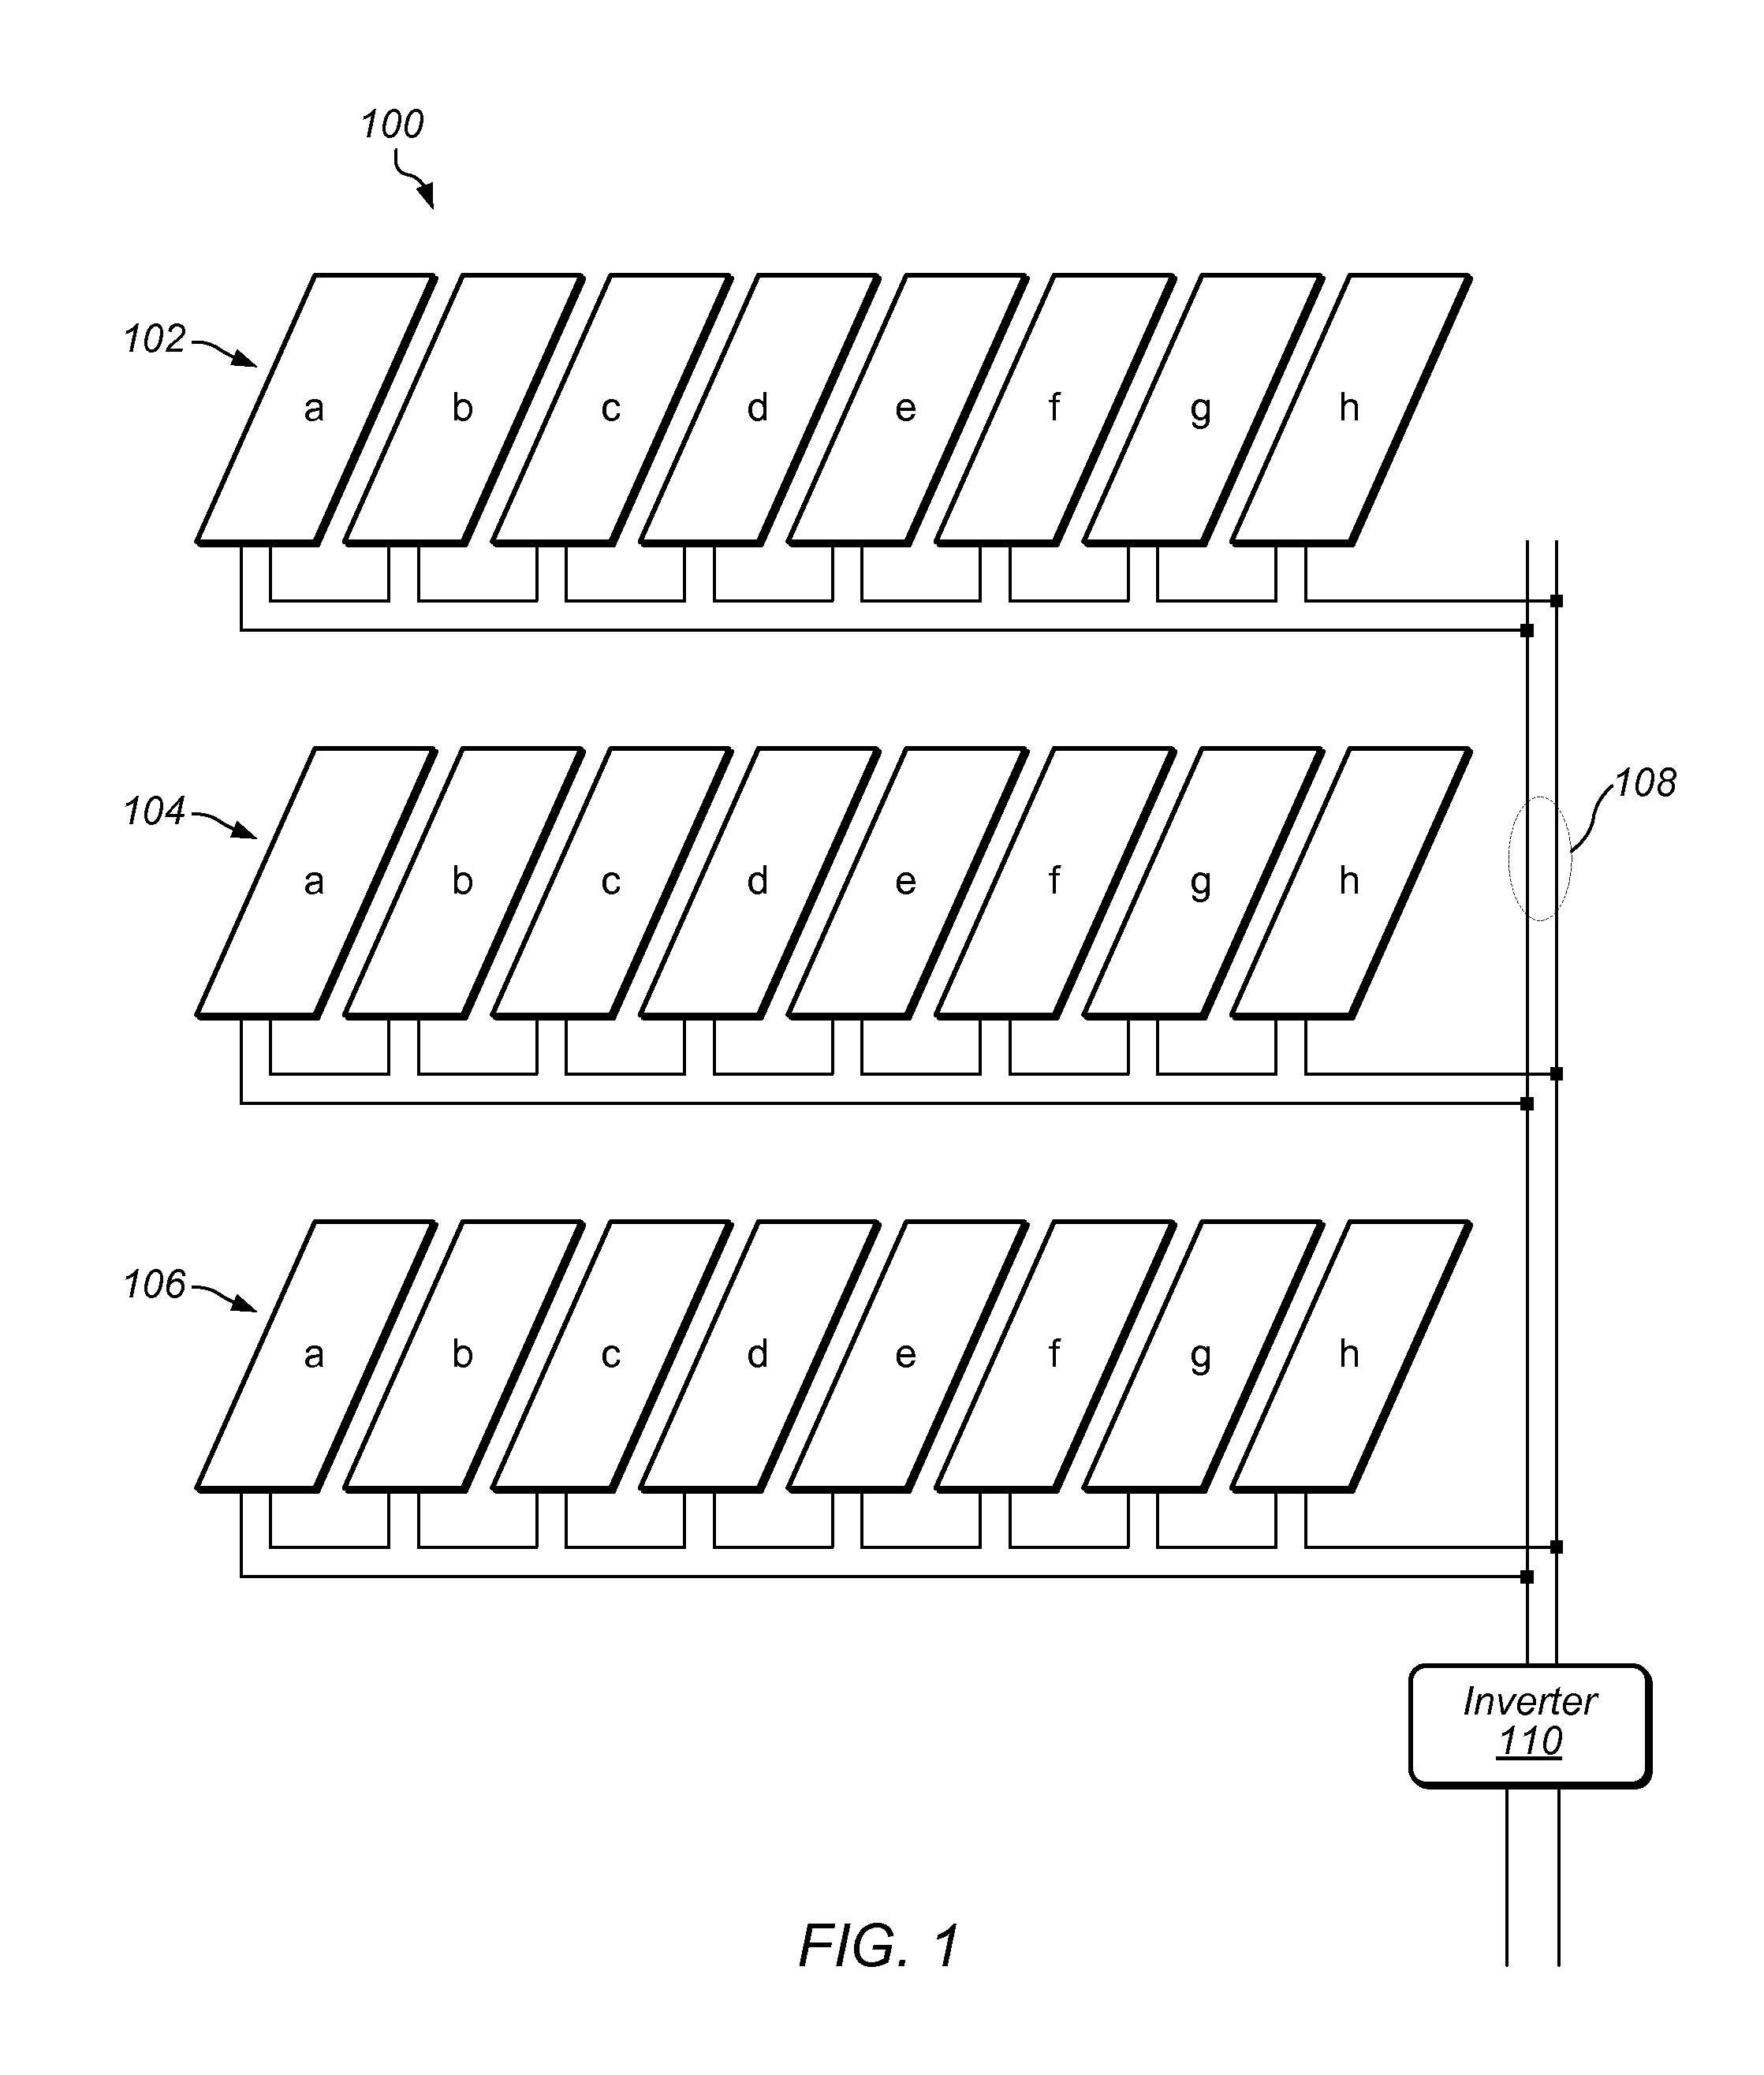 Constraint Weighted Regulation of DC/DC Converters